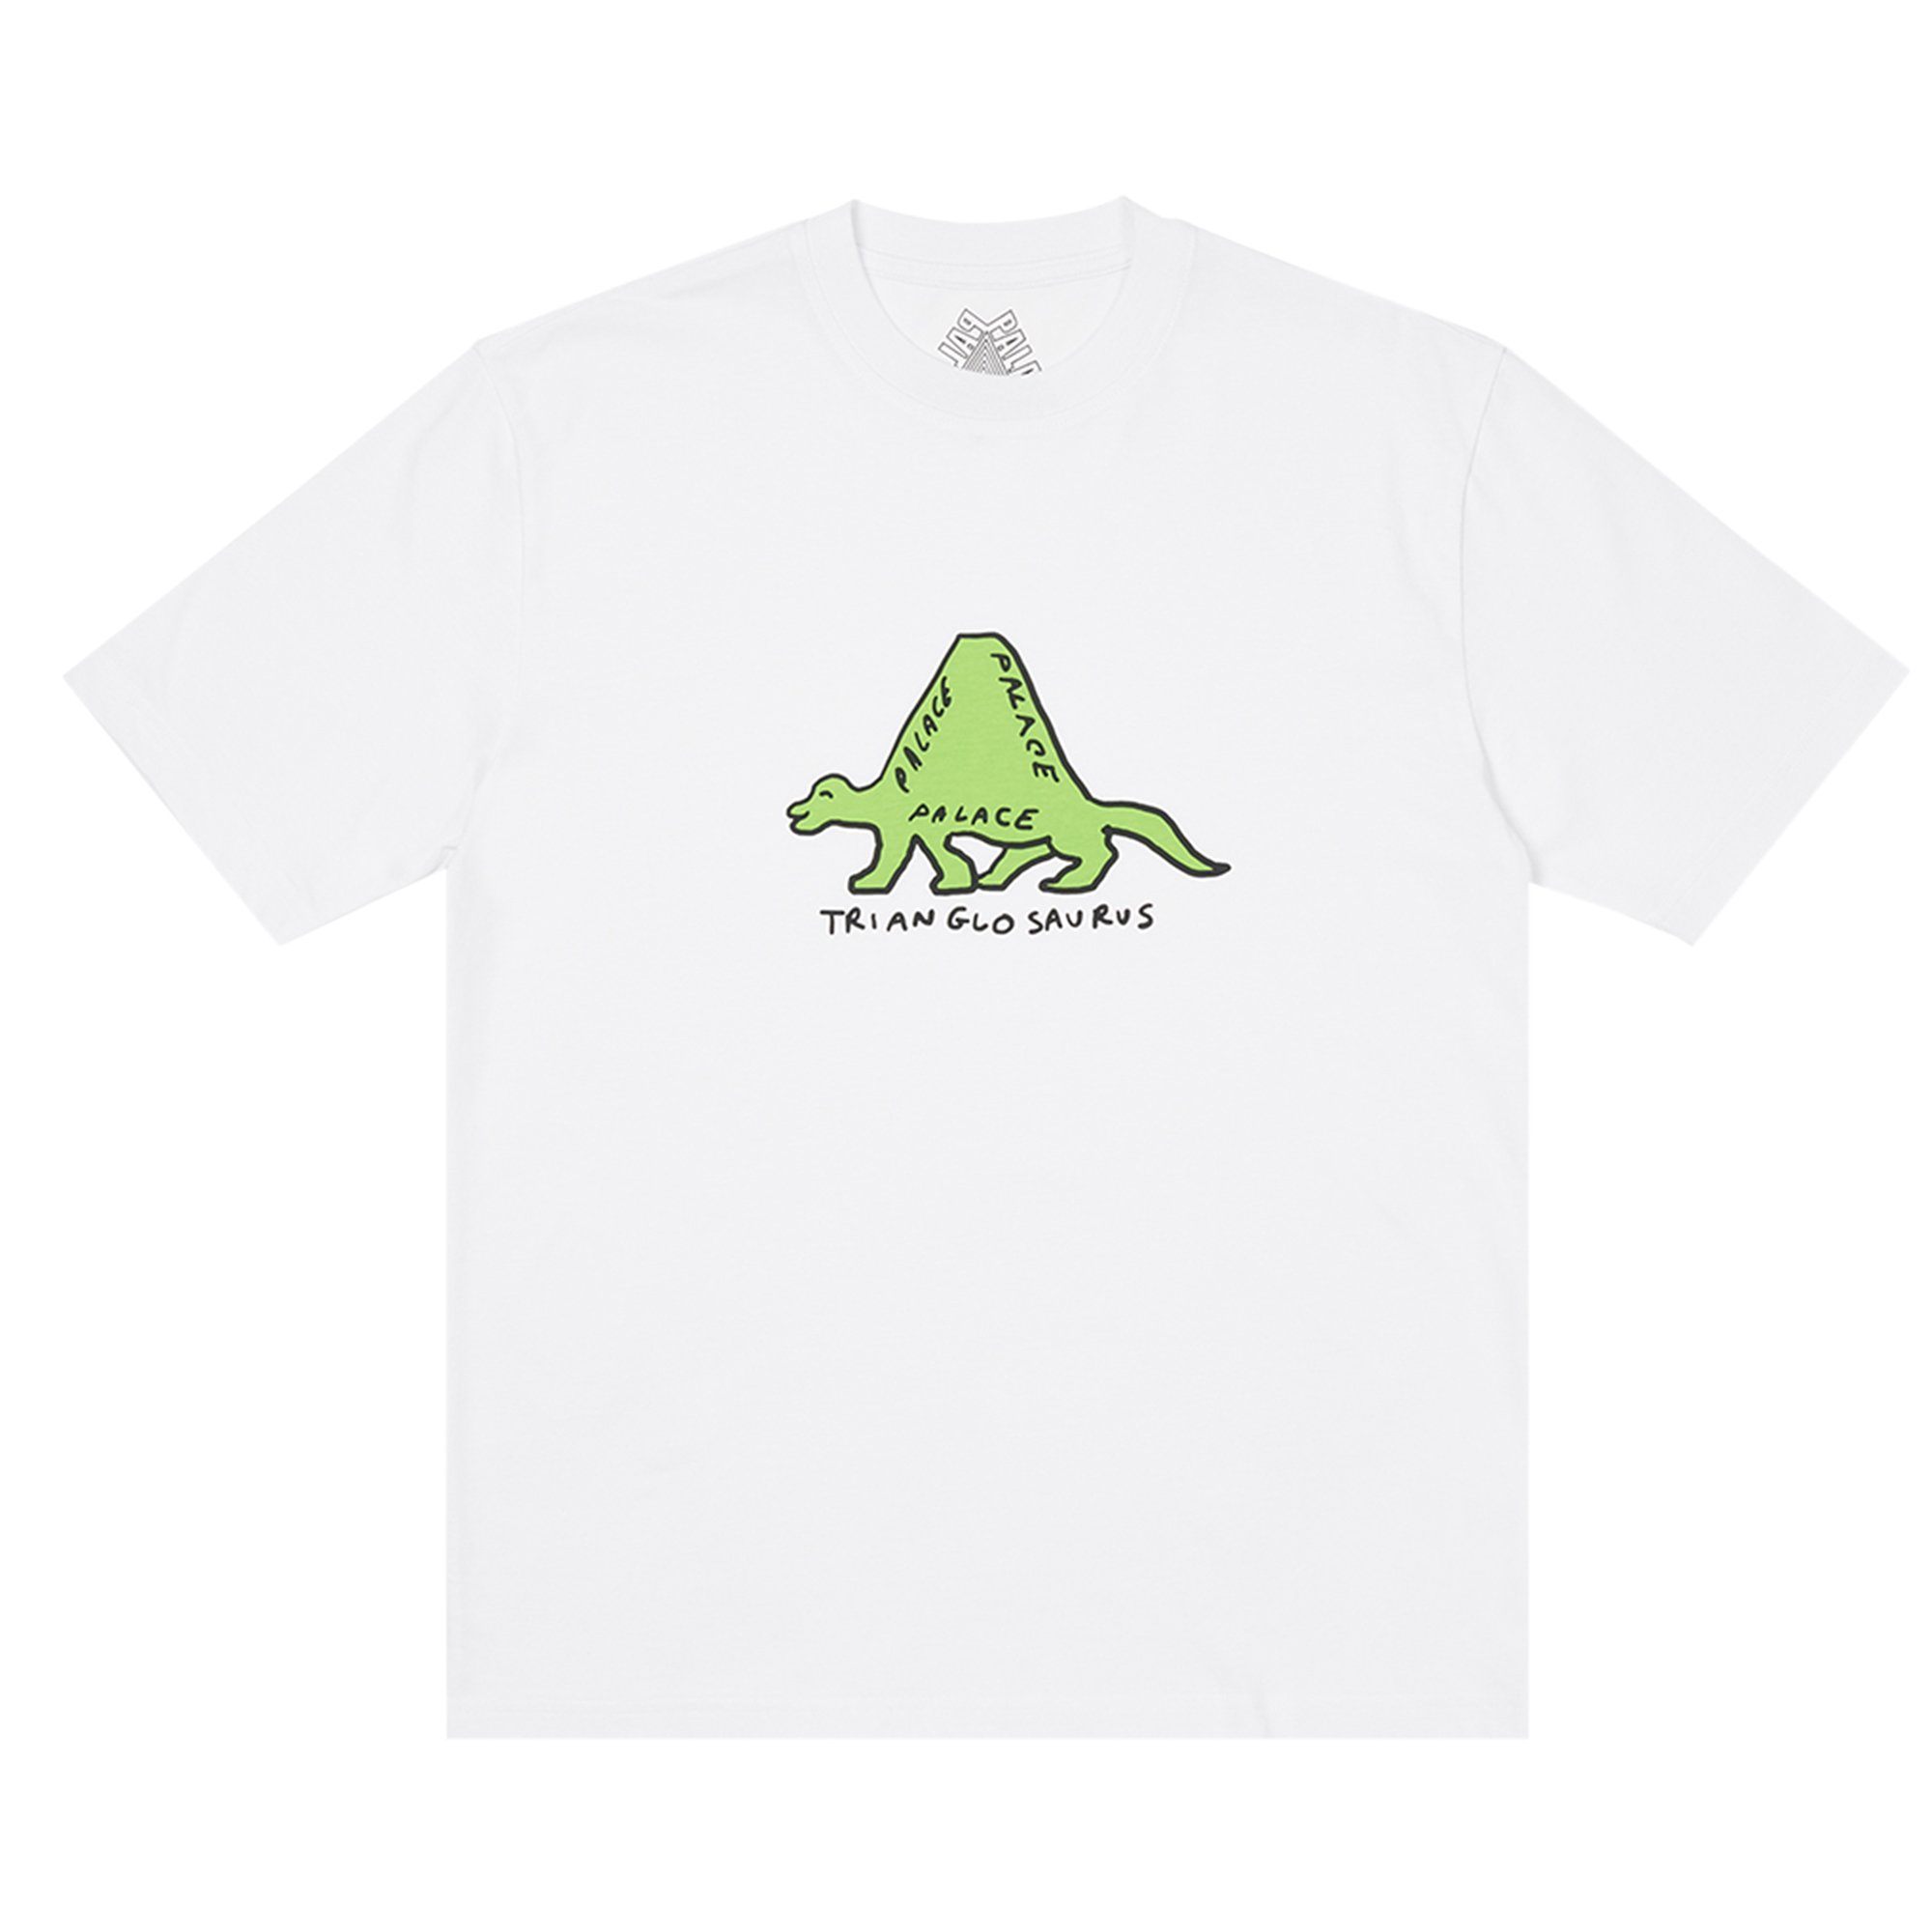 Palace Steaming T-Shirt White